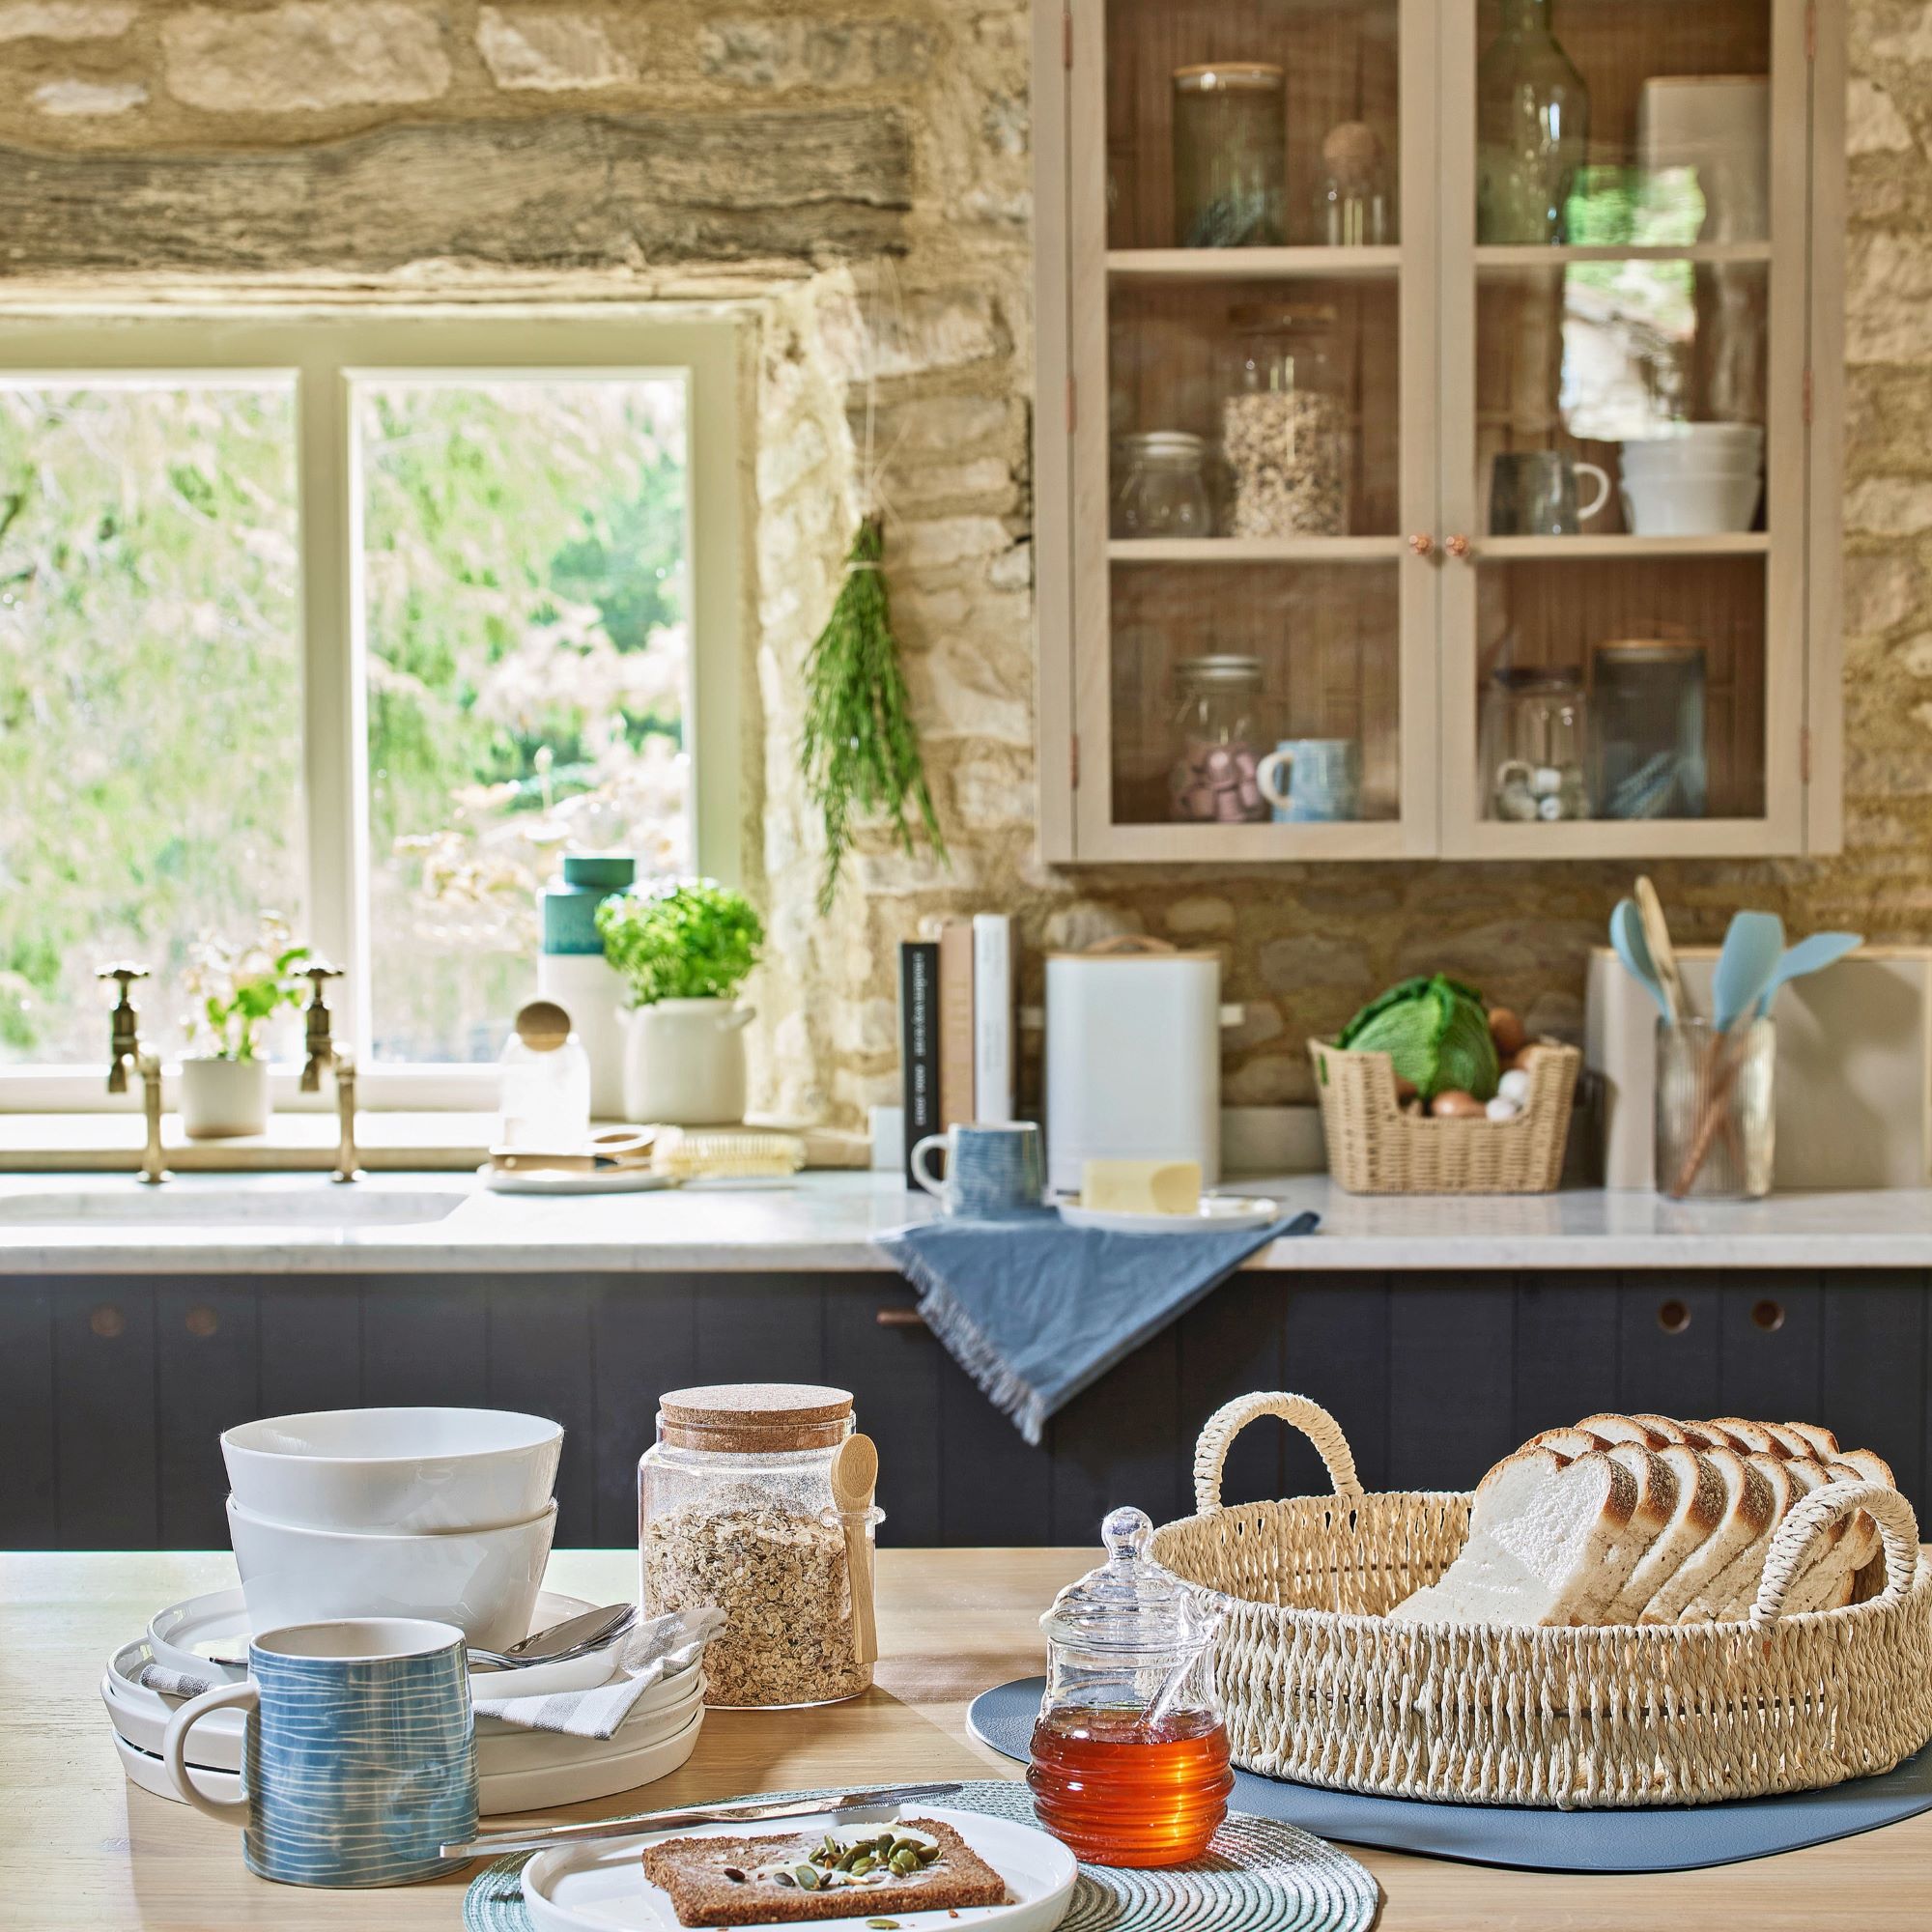 Be inspired by an elegant painted kitchen | Ideal Home